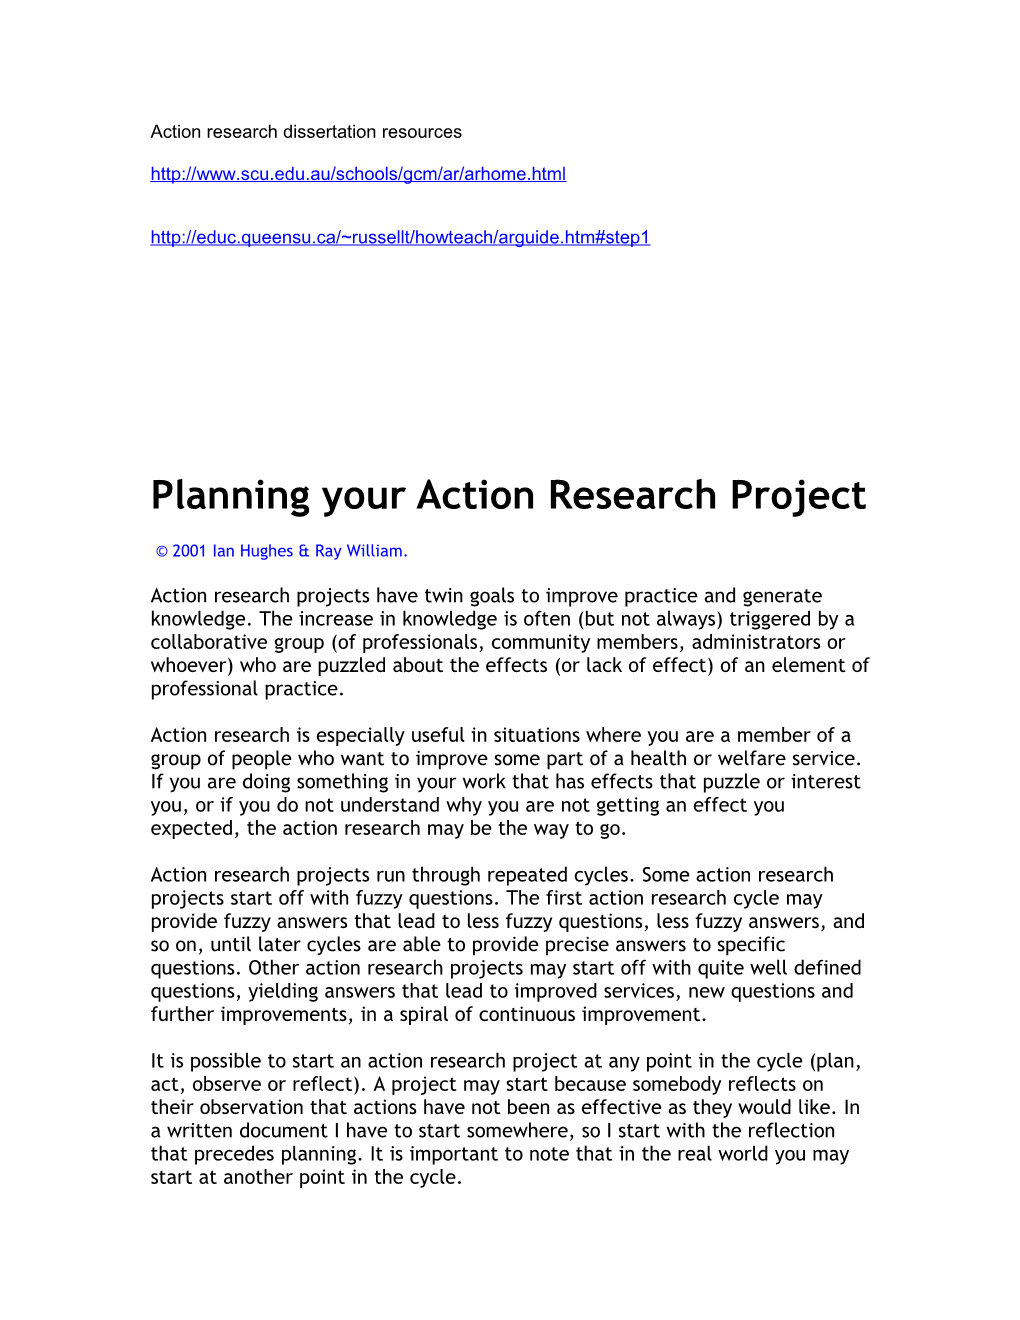 Action Research Dissertation Resources